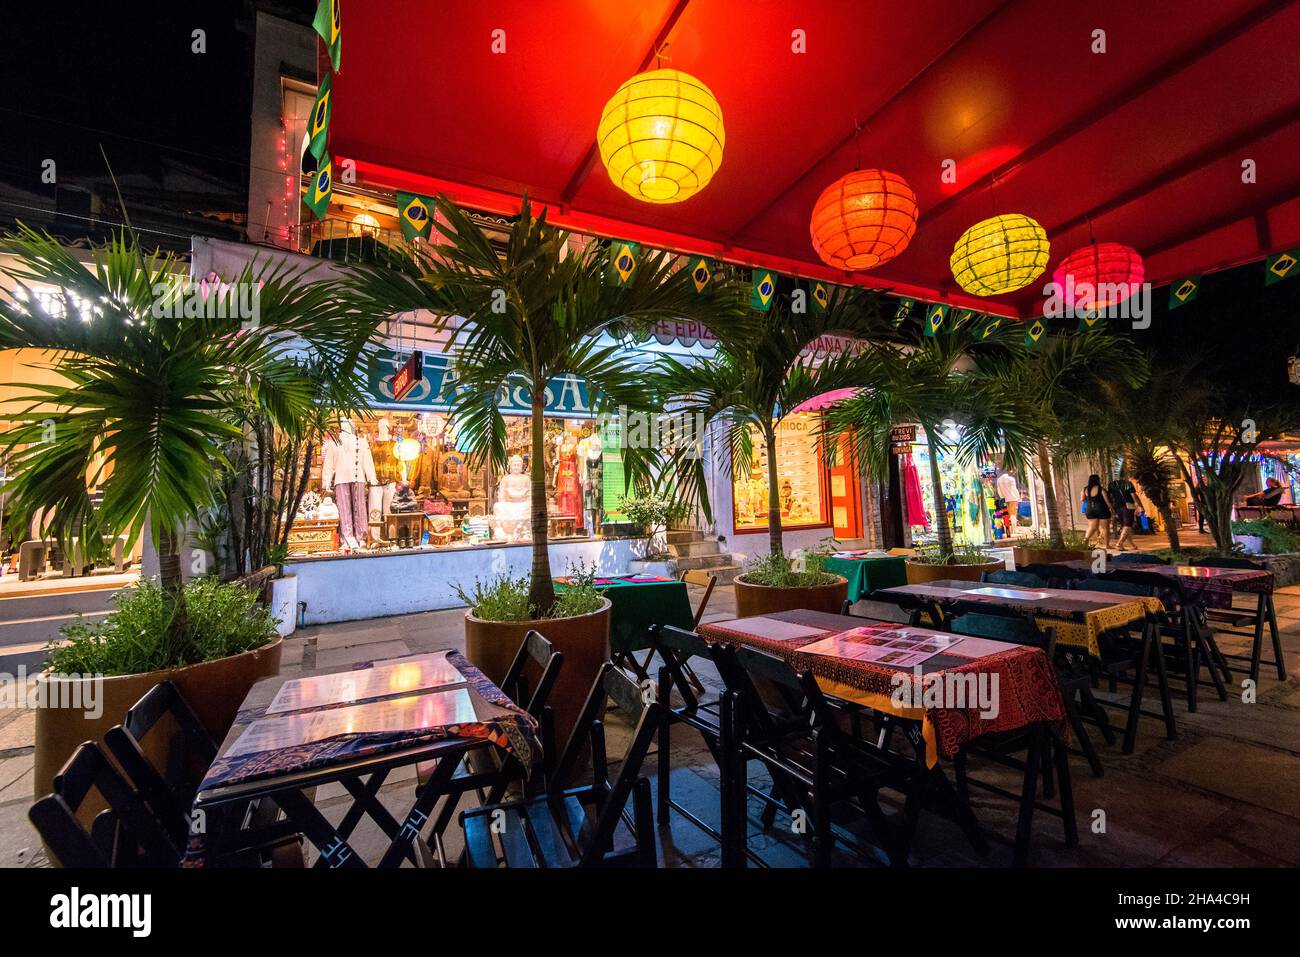 Buzios, Brazil - July 24, 2018: Tables of the restaurant in the street awaiting for guests. Stock Photo